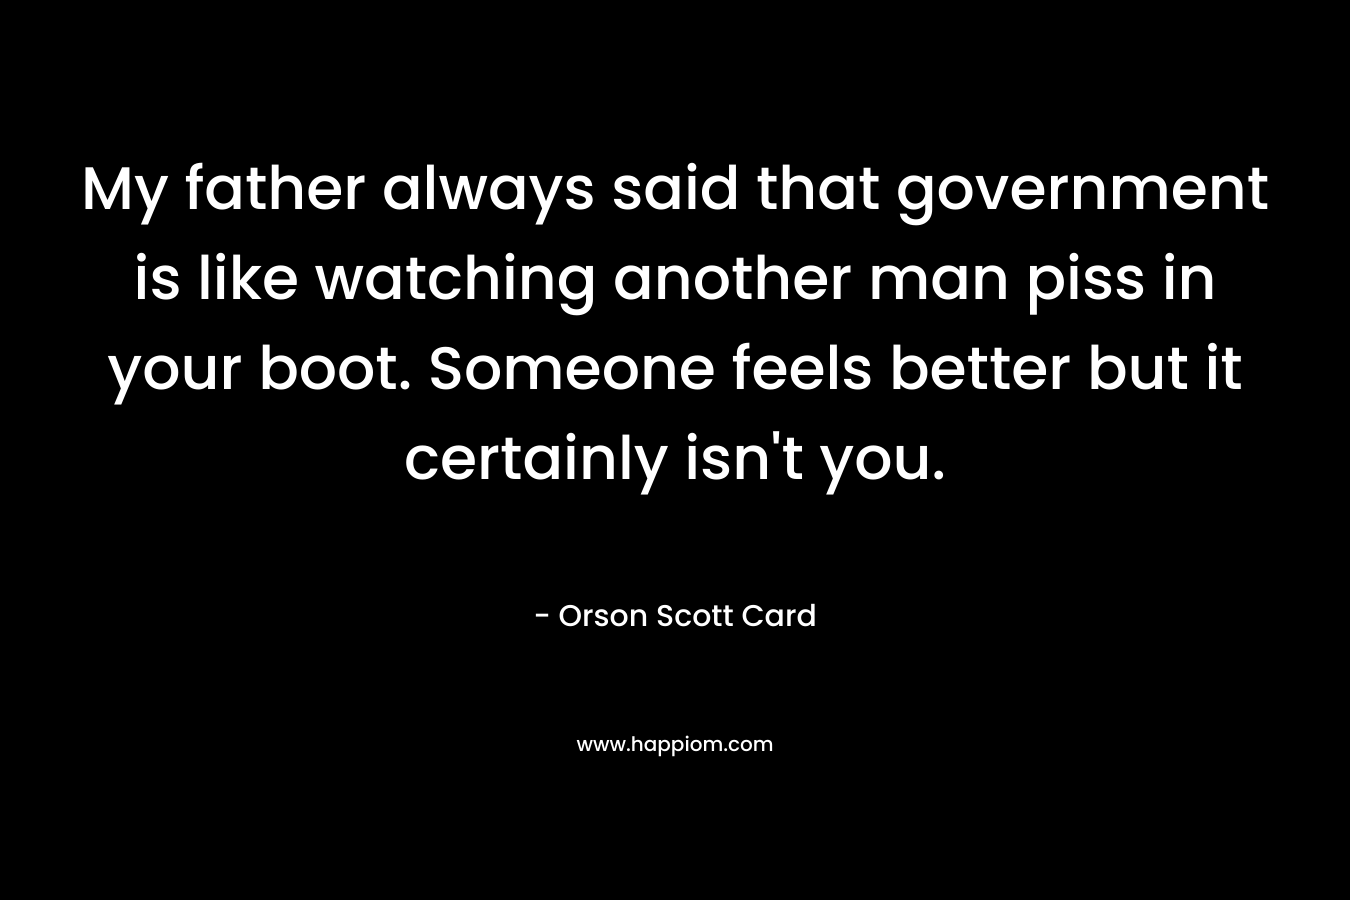 My father always said that government is like watching another man piss in your boot. Someone feels better but it certainly isn't you.